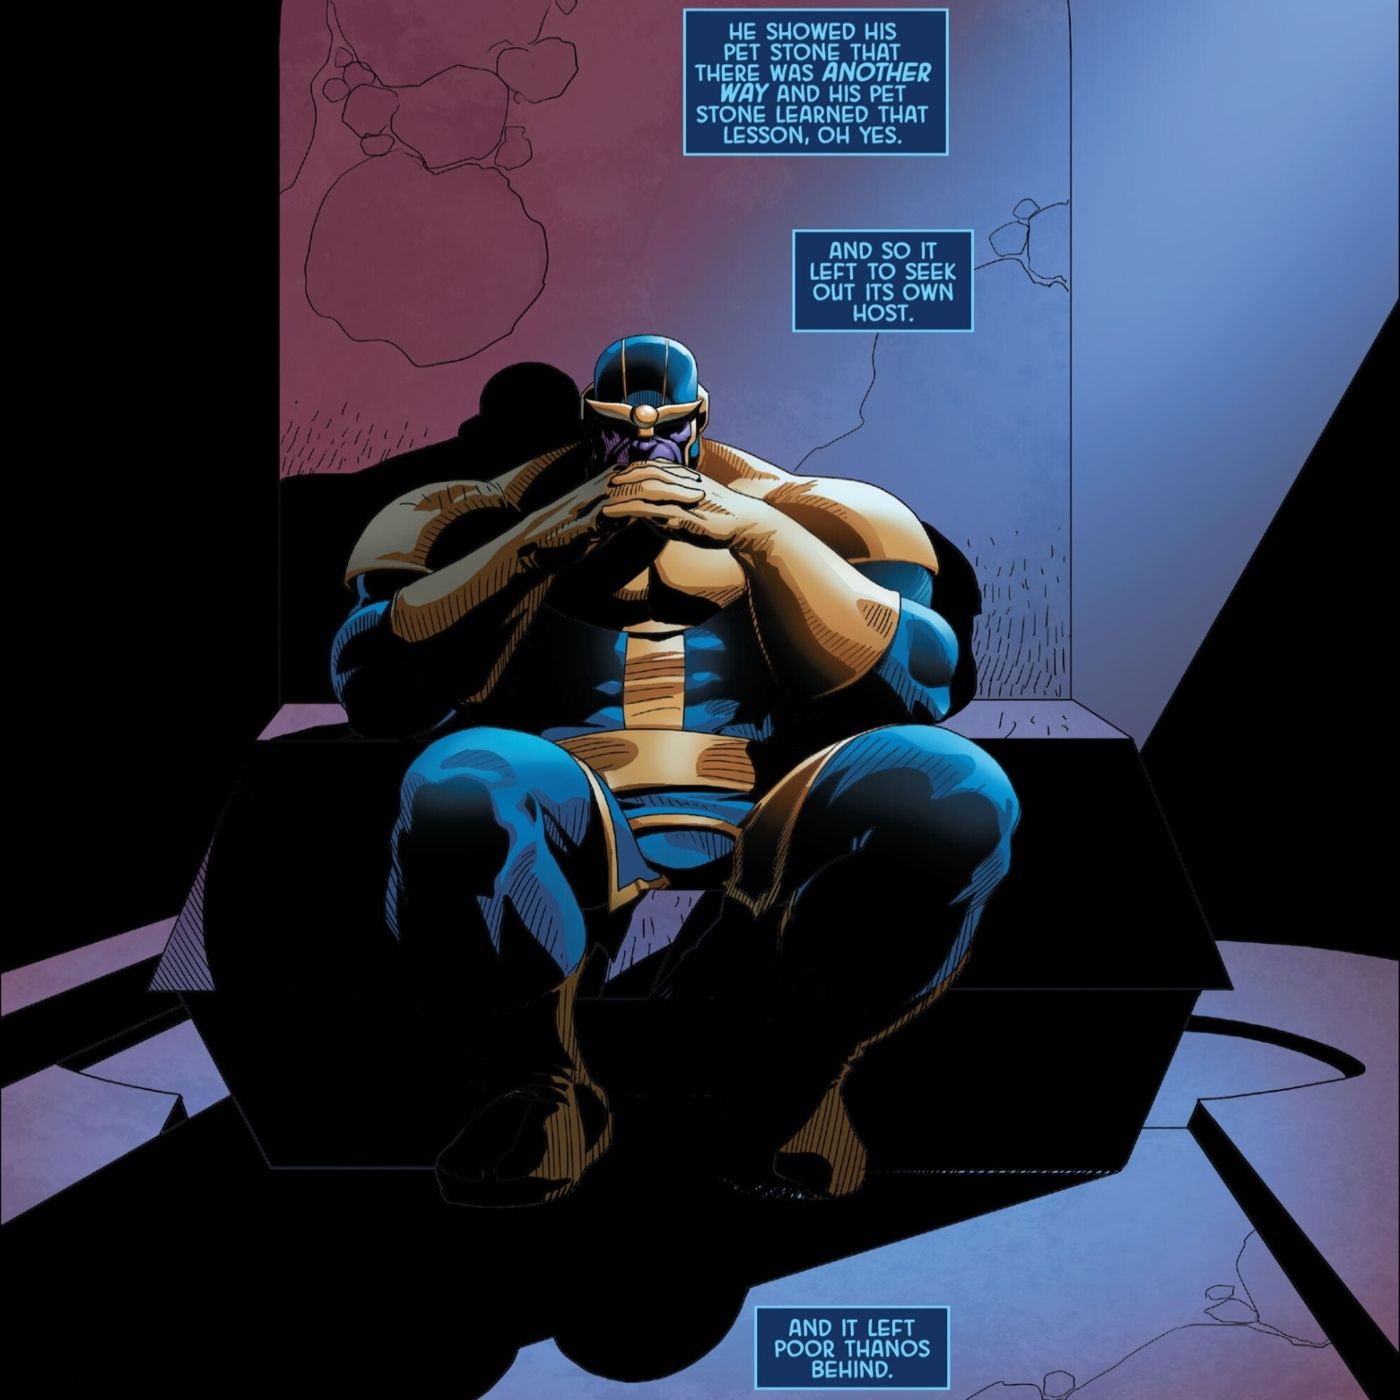 Thanos sitting alone in darkness after the Death Stone abandoned him.